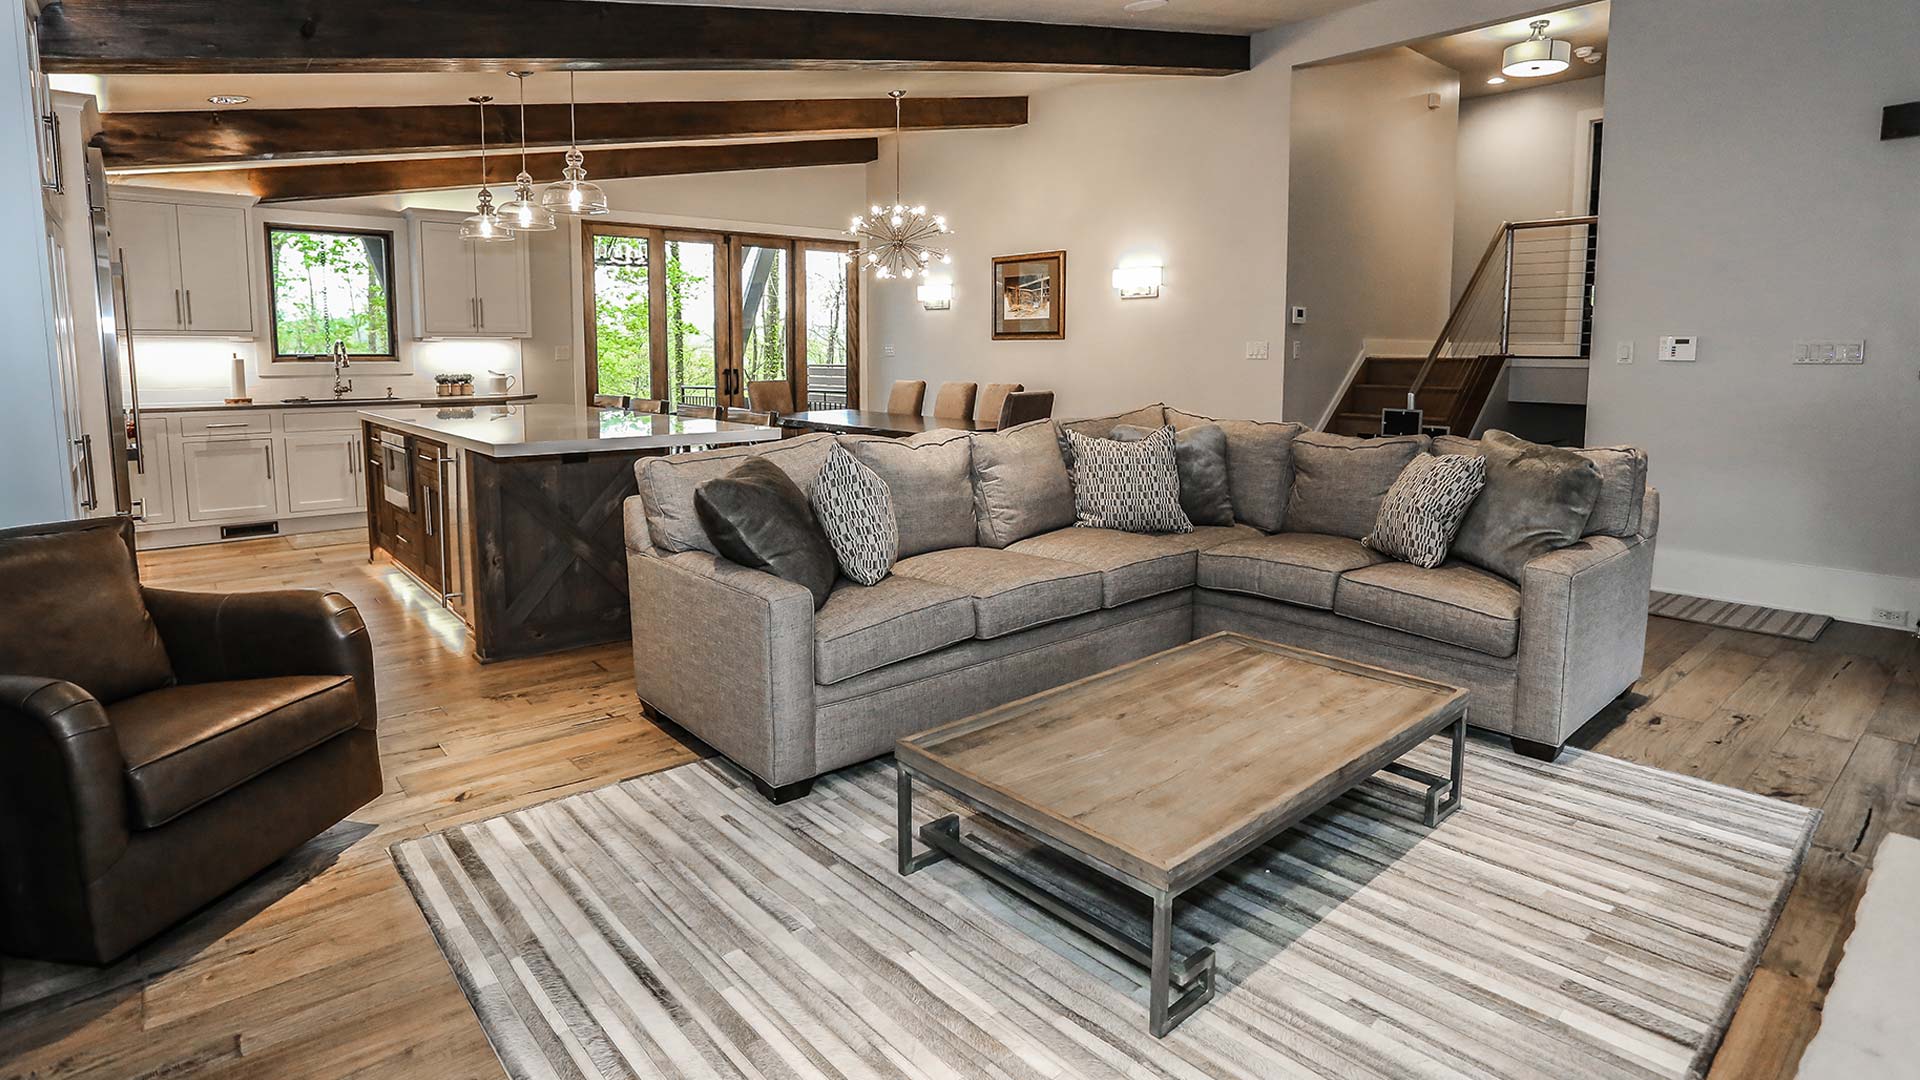 interior shot of greystone's living area. The colors in the room are a neutral gray tone. There is a plush couch surrounding a wooden coffee table. It is an open floor plan with exposed wooden beams on the ceiling.